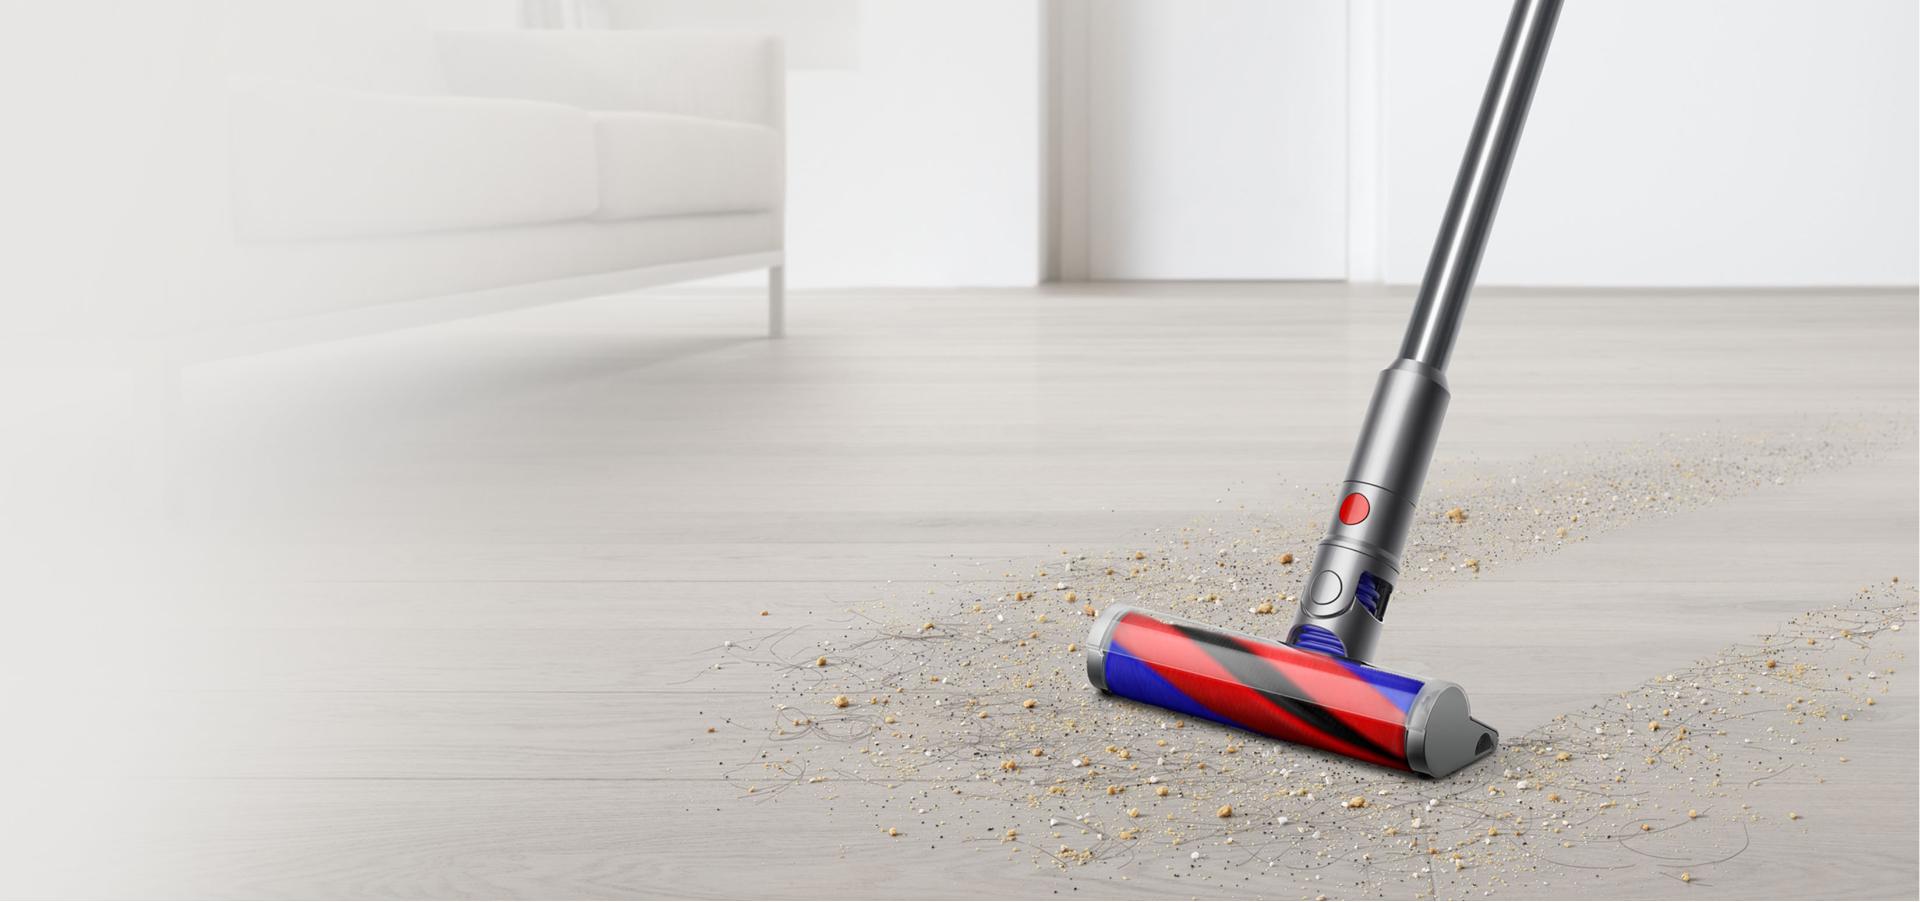 Dyson Micro 1.5kg cleaning debris from hard floor